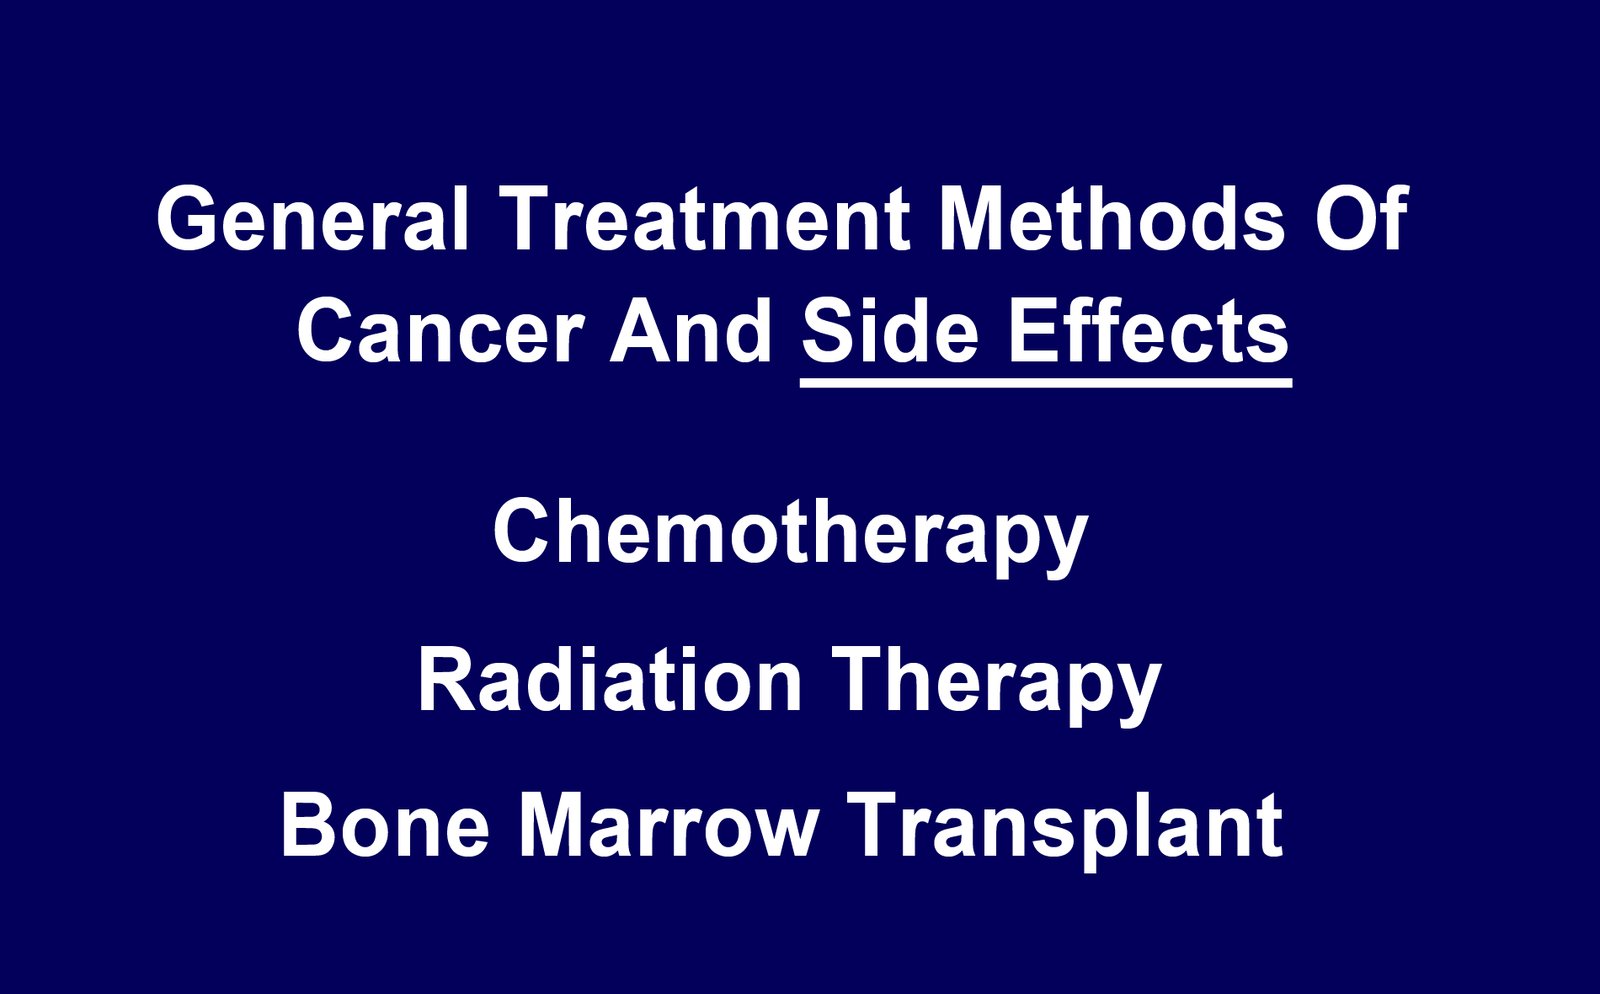 General Treatment Methods of Cancer and Side Effects